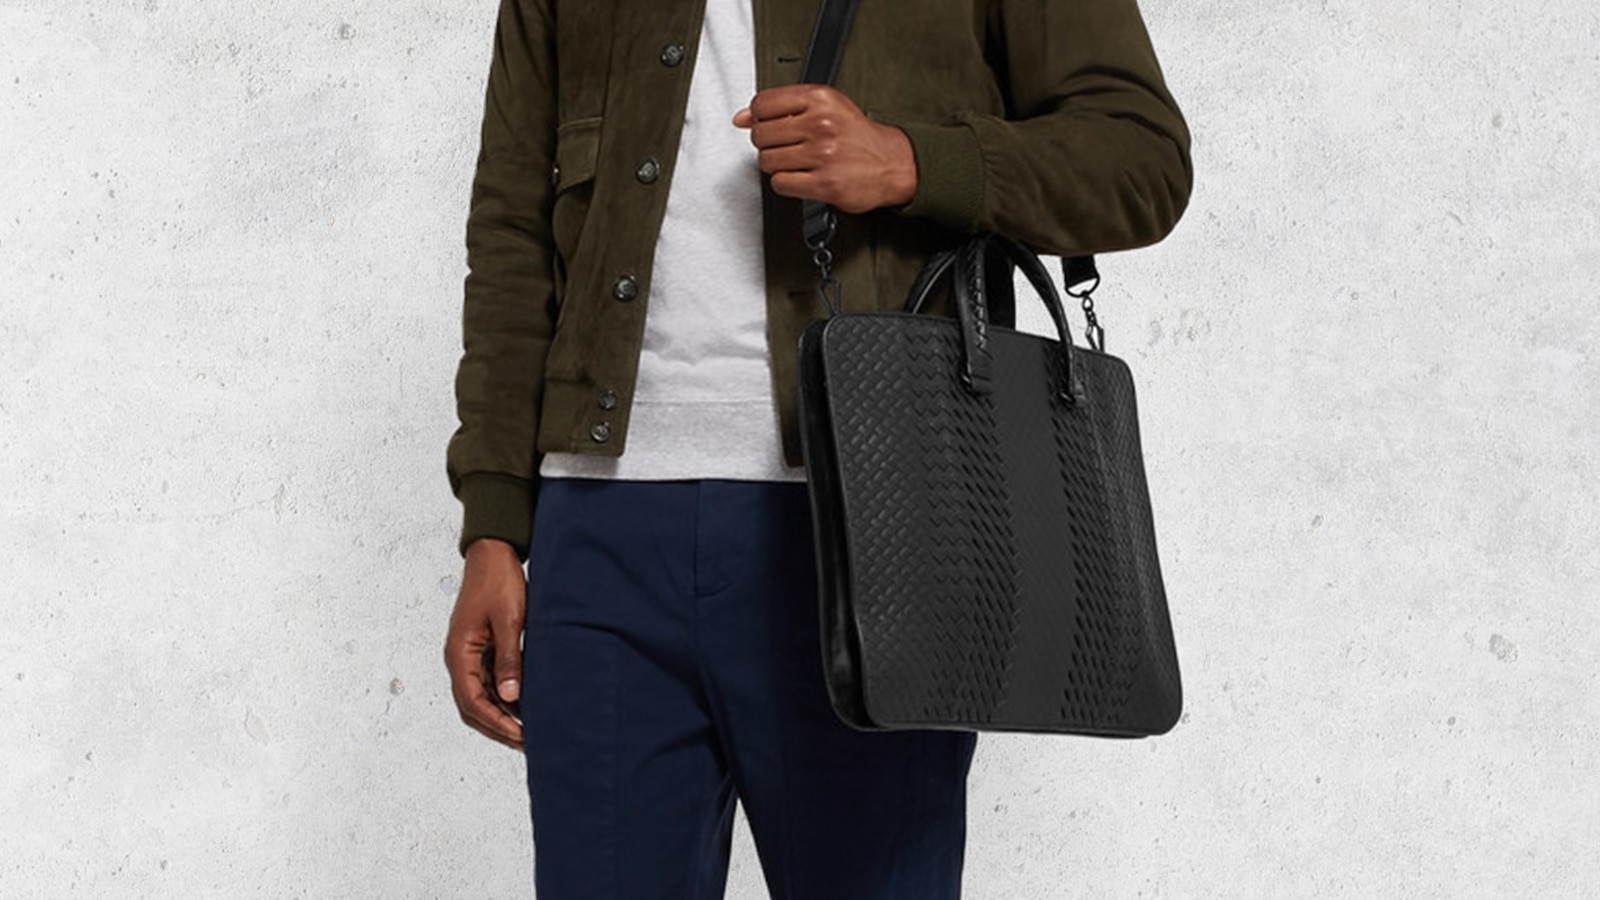 Buy Office Bags For Men online in India at Myntra